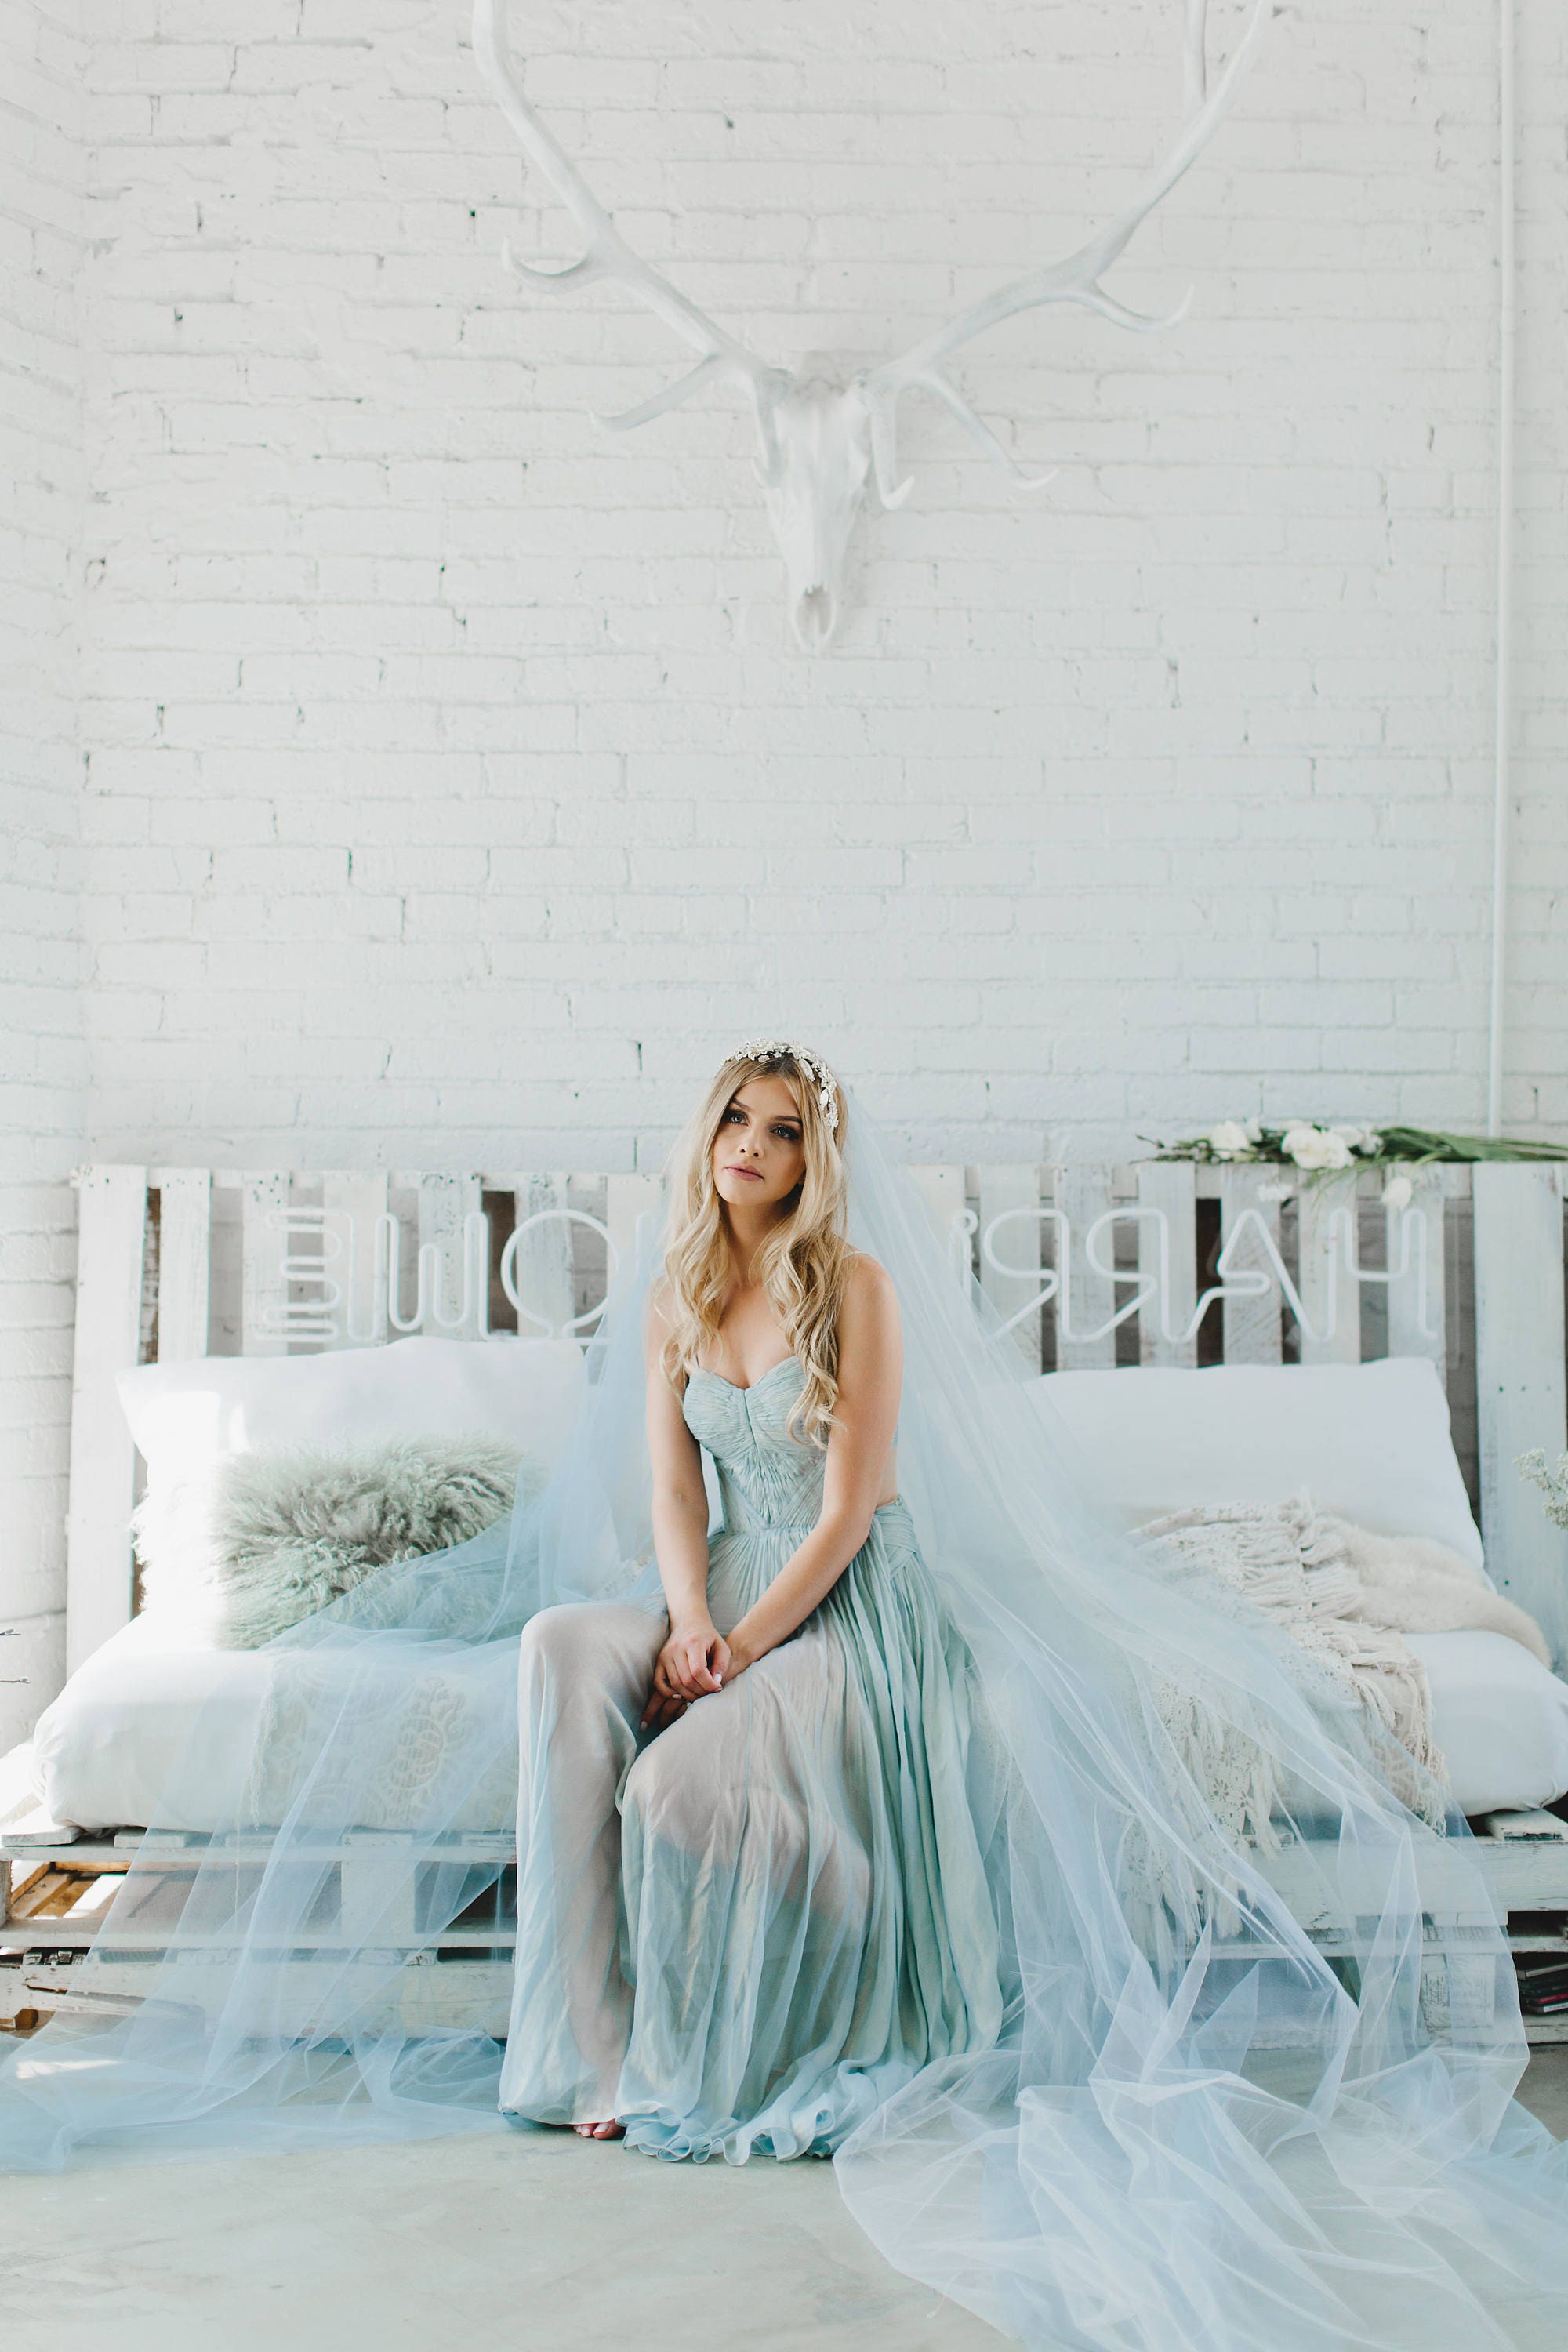 Light blue two tier cathedral veil with hand-sewn textile petals and  crystals